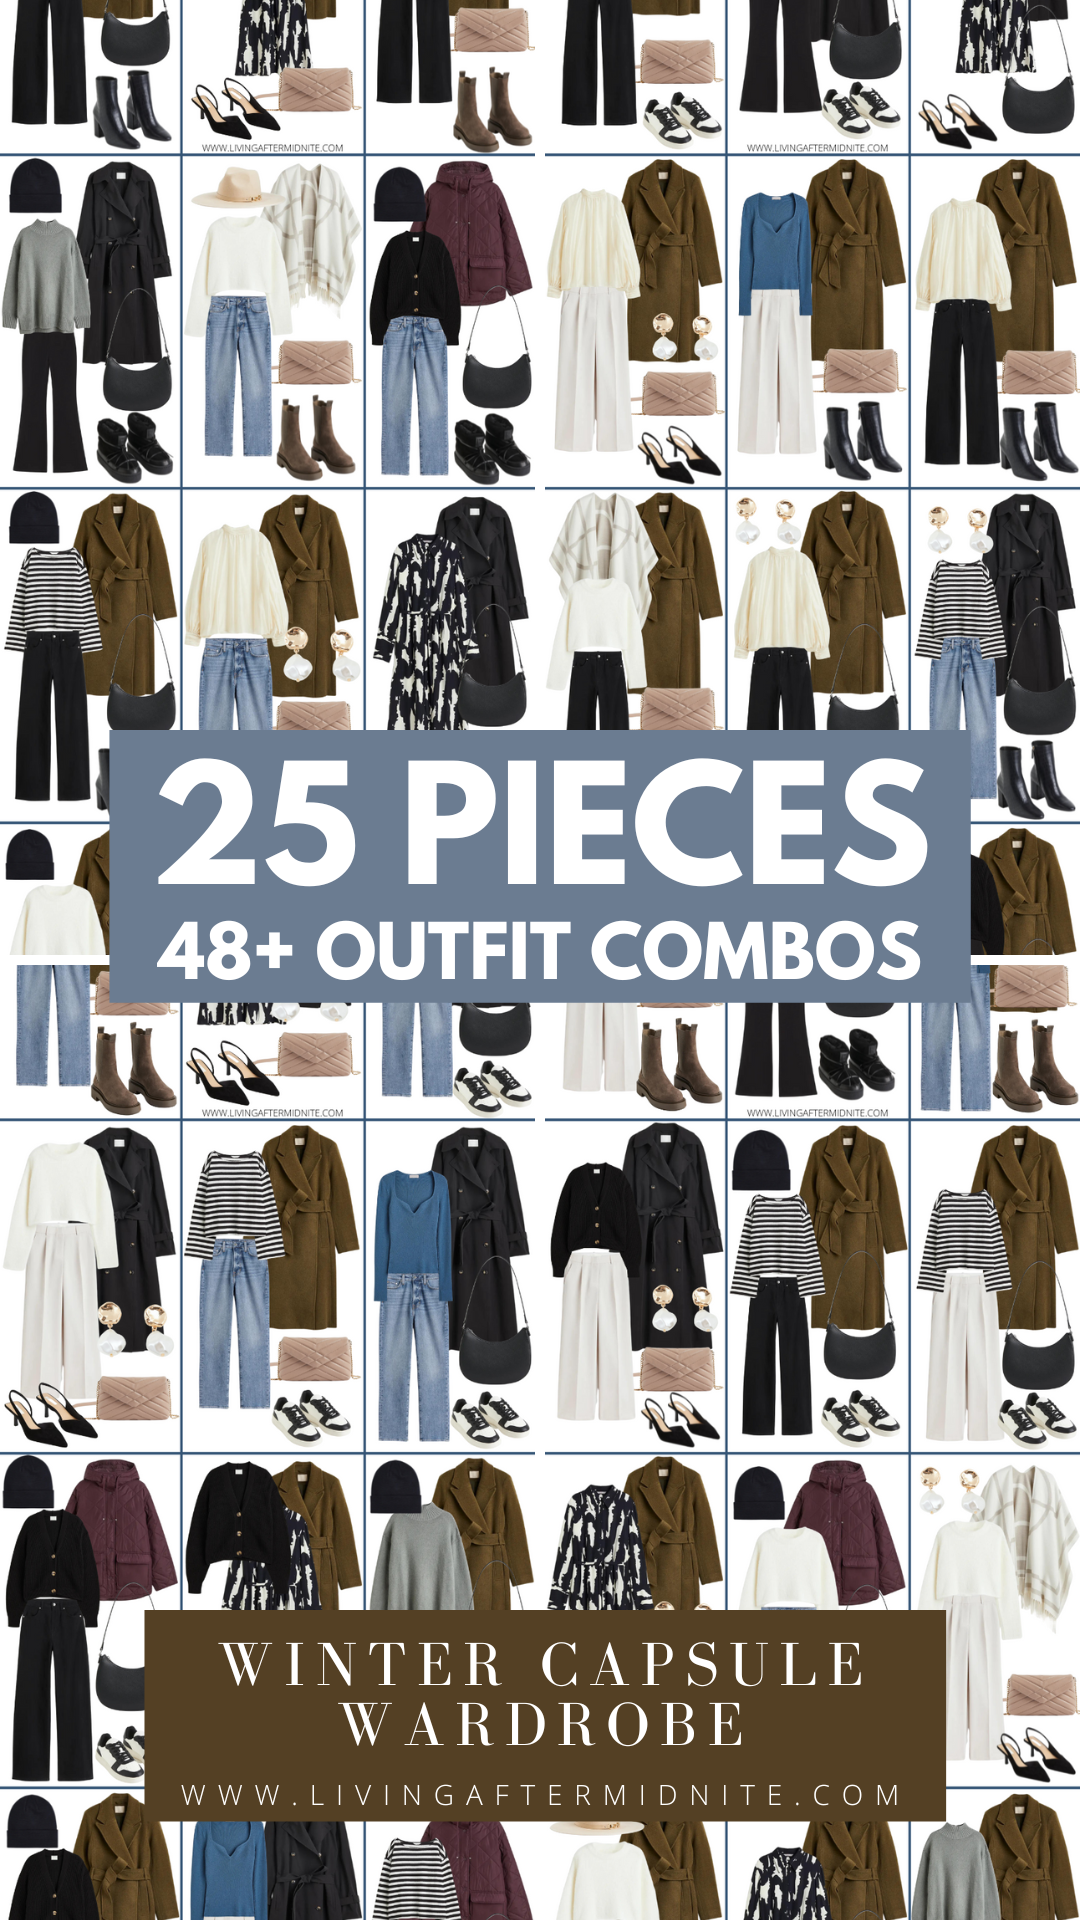 25 pieces of clothes for outfit combos